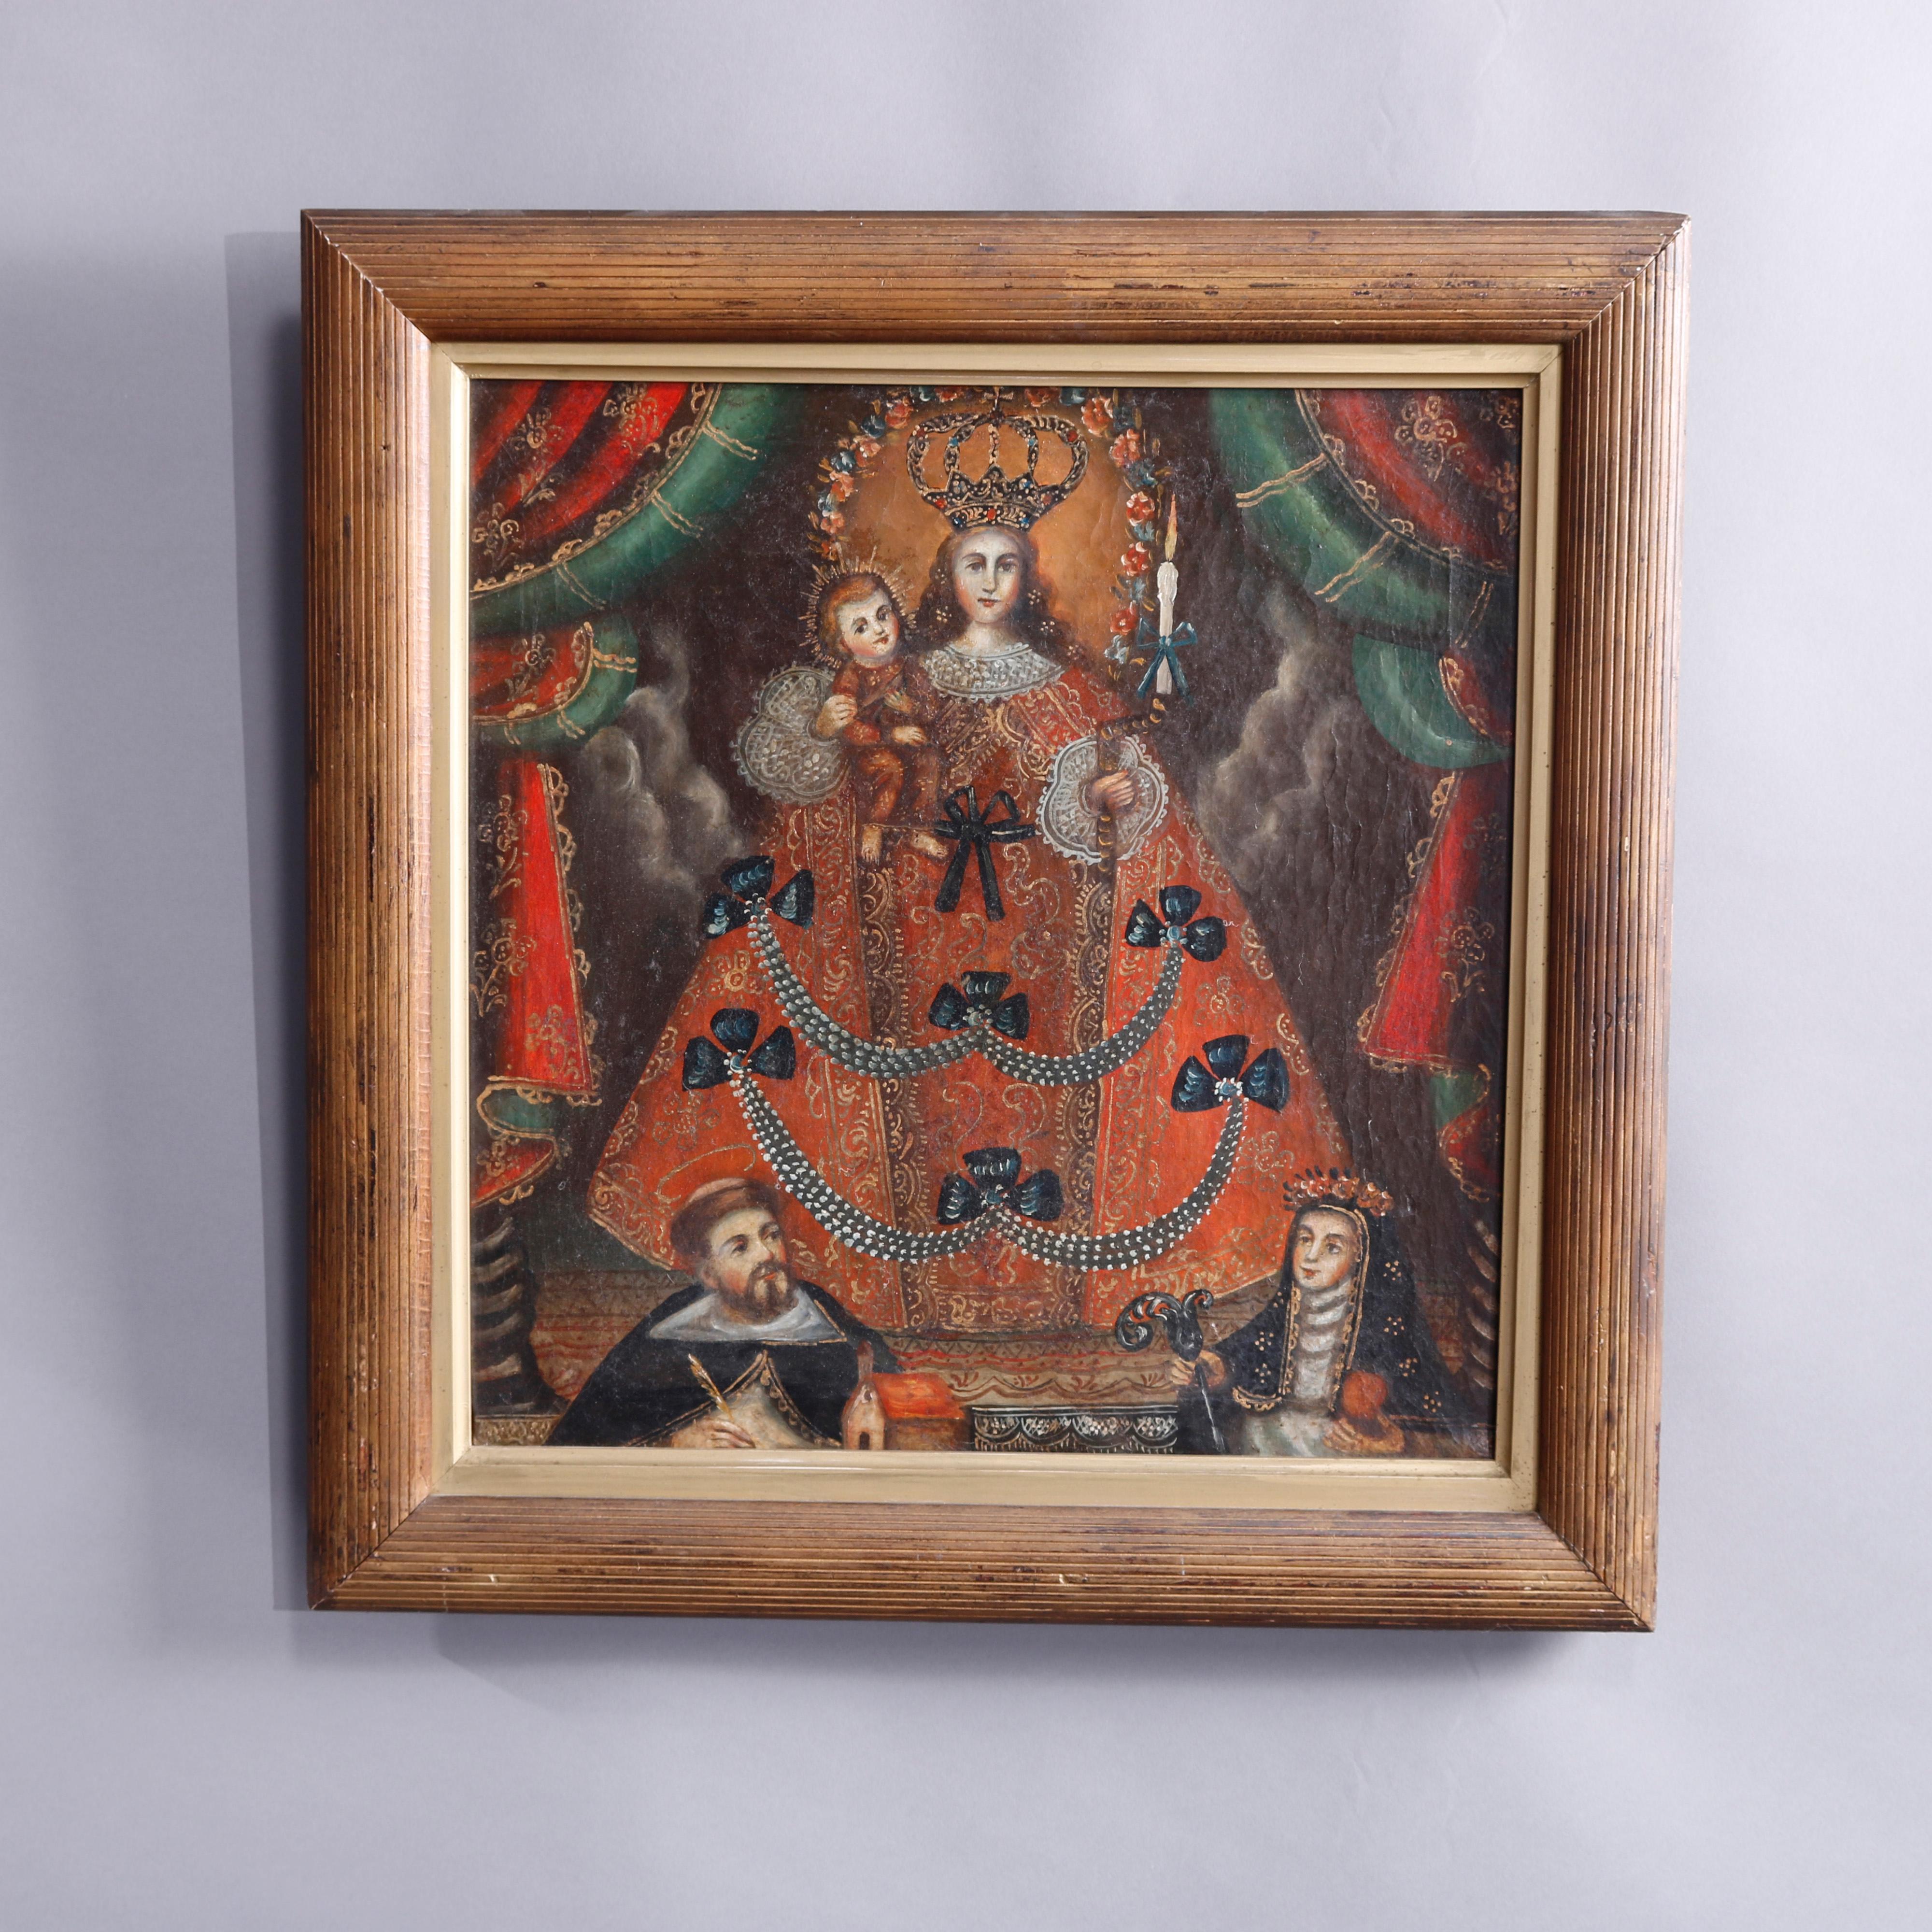 An antique English reliquary oil on canvas painting of Madonna and The Christ Child, seated in wood frame, 19th century

Measures - overall 20''H x 20''W x 1.75'D; sight 15'' x 15.5''.